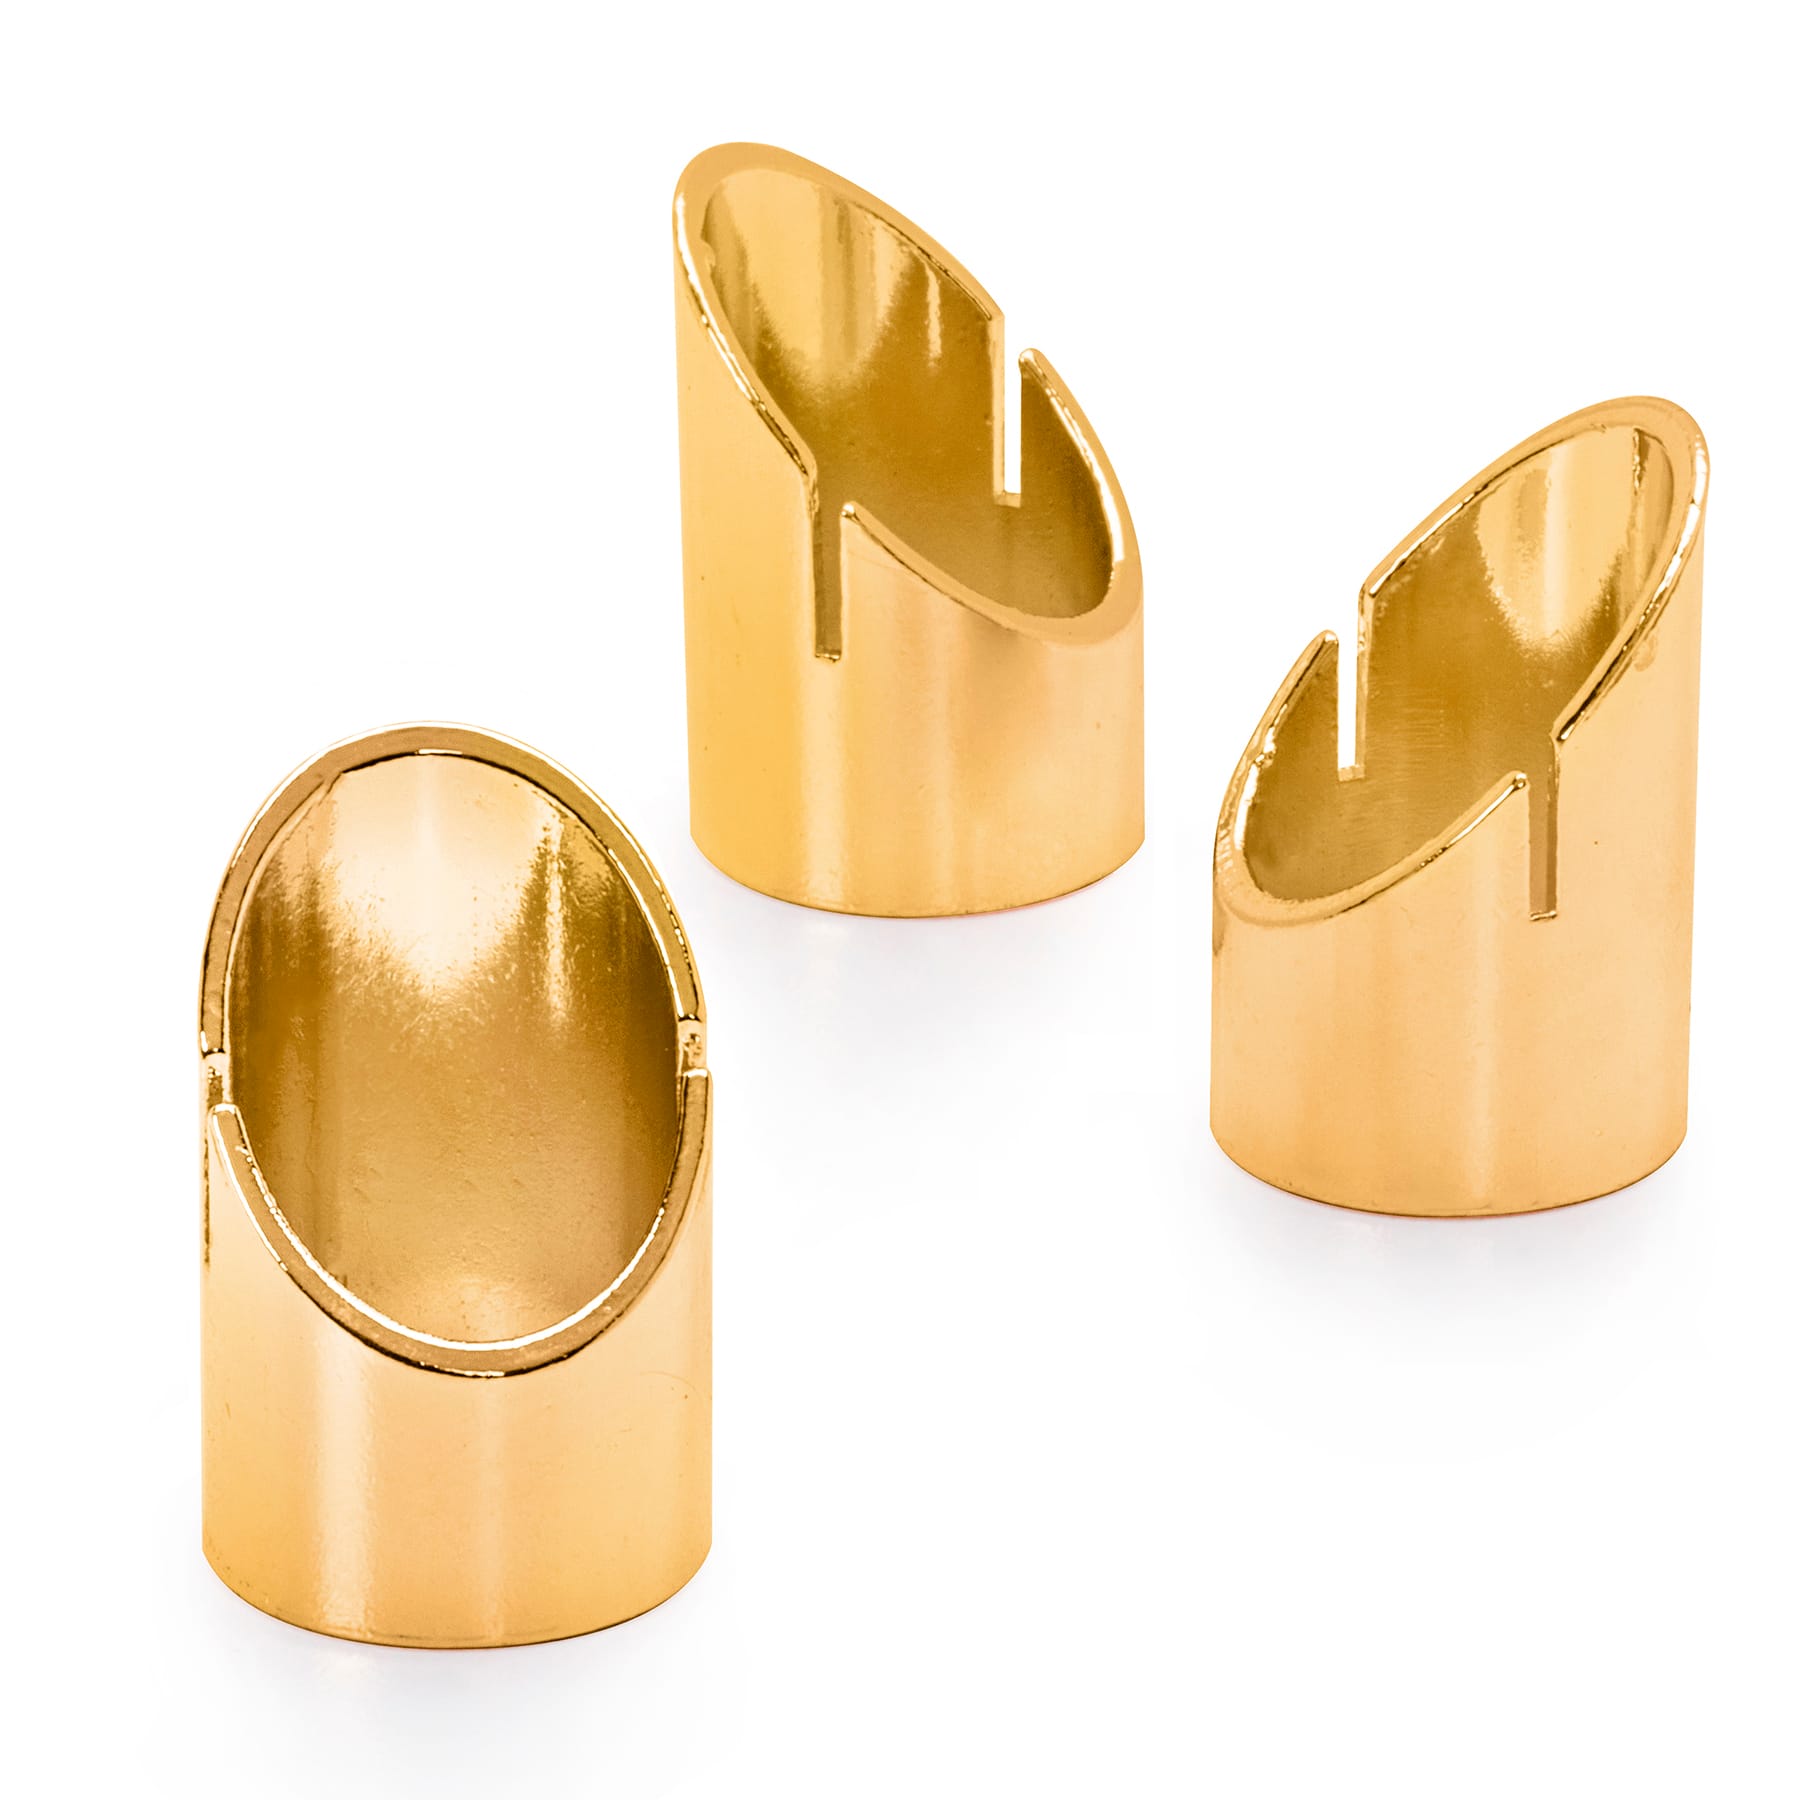 gold table place card holders